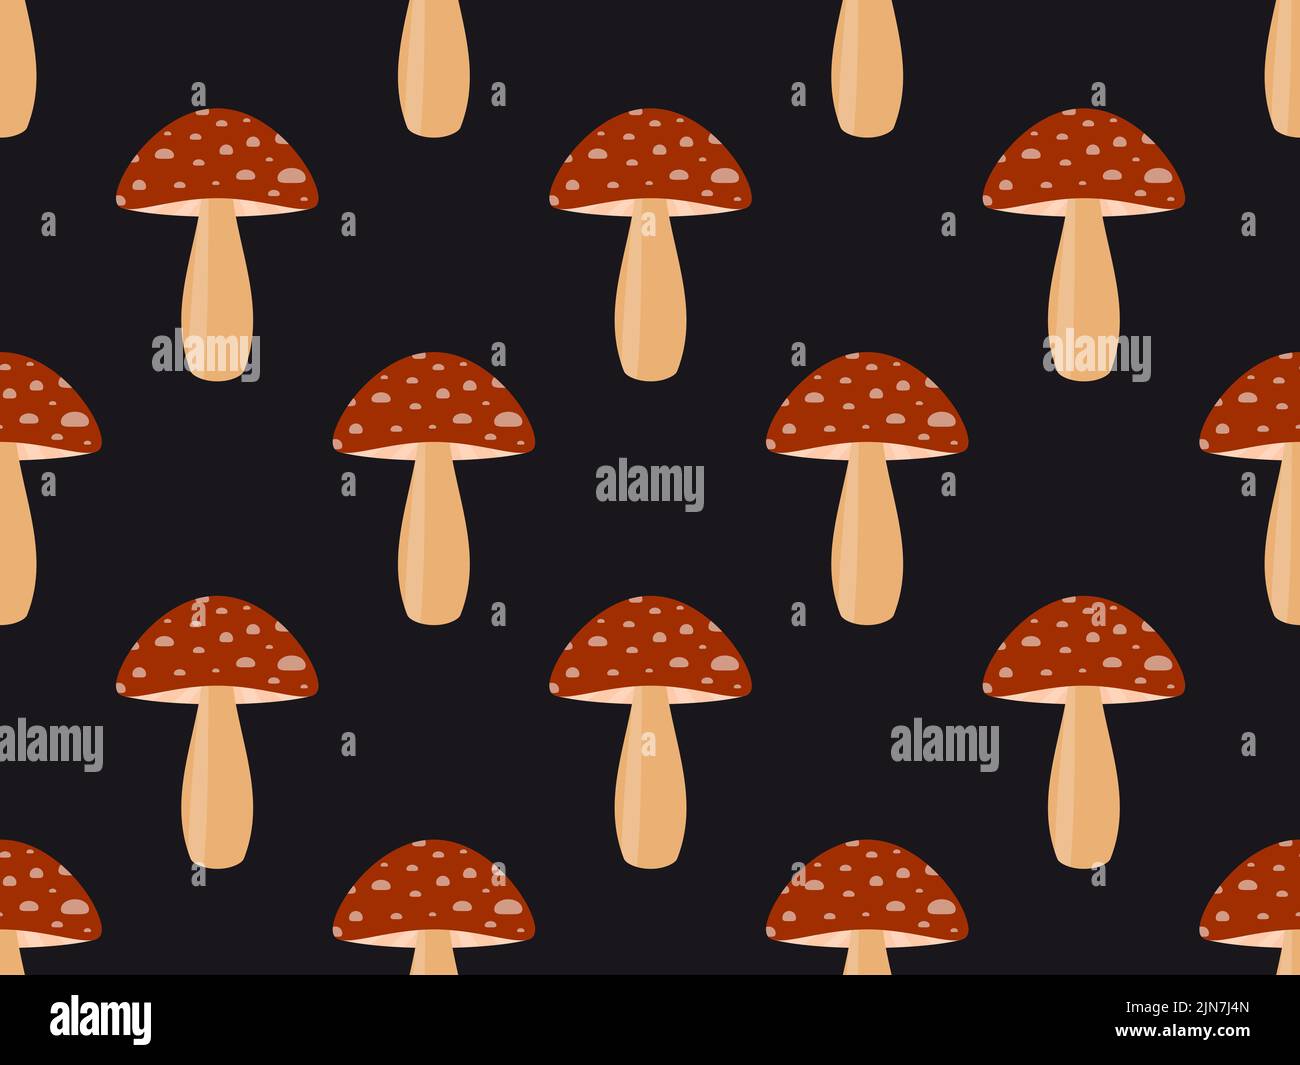 Amanita muscaria red seamless pattern. Mushrooms with red caps fly agaric. Design for posters, banners and promotional items. Vector illustration Stock Vector